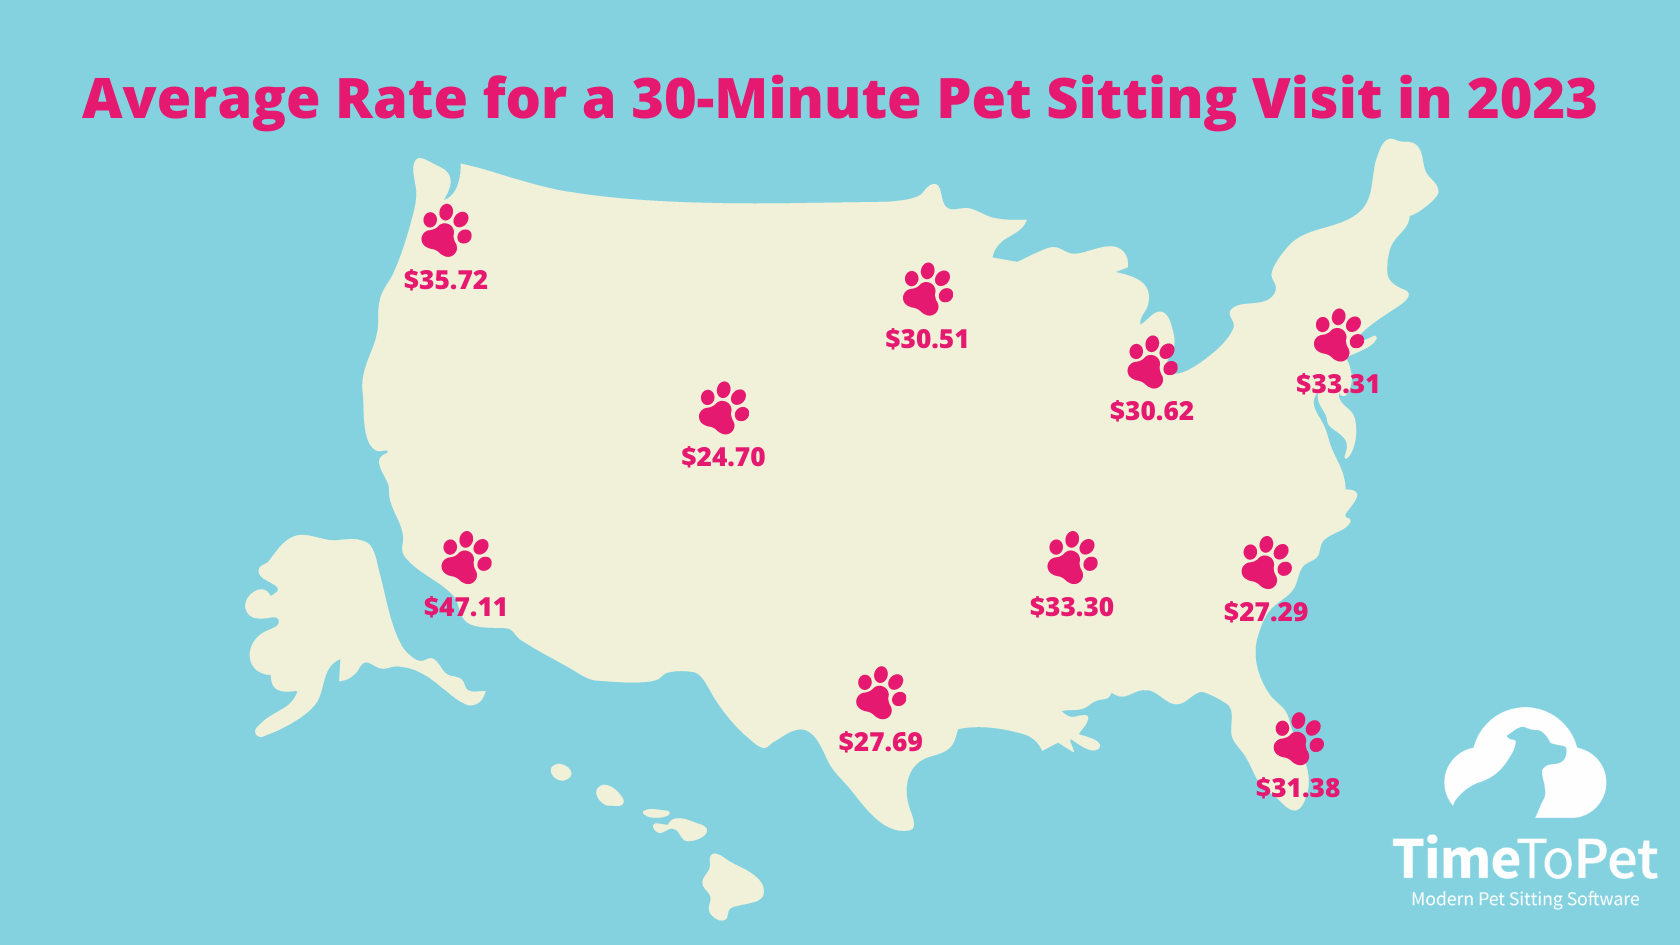 Average%20Rate%20for%20a%2030-Minute%20Pet%20Sitting%20Visit%20in%202023